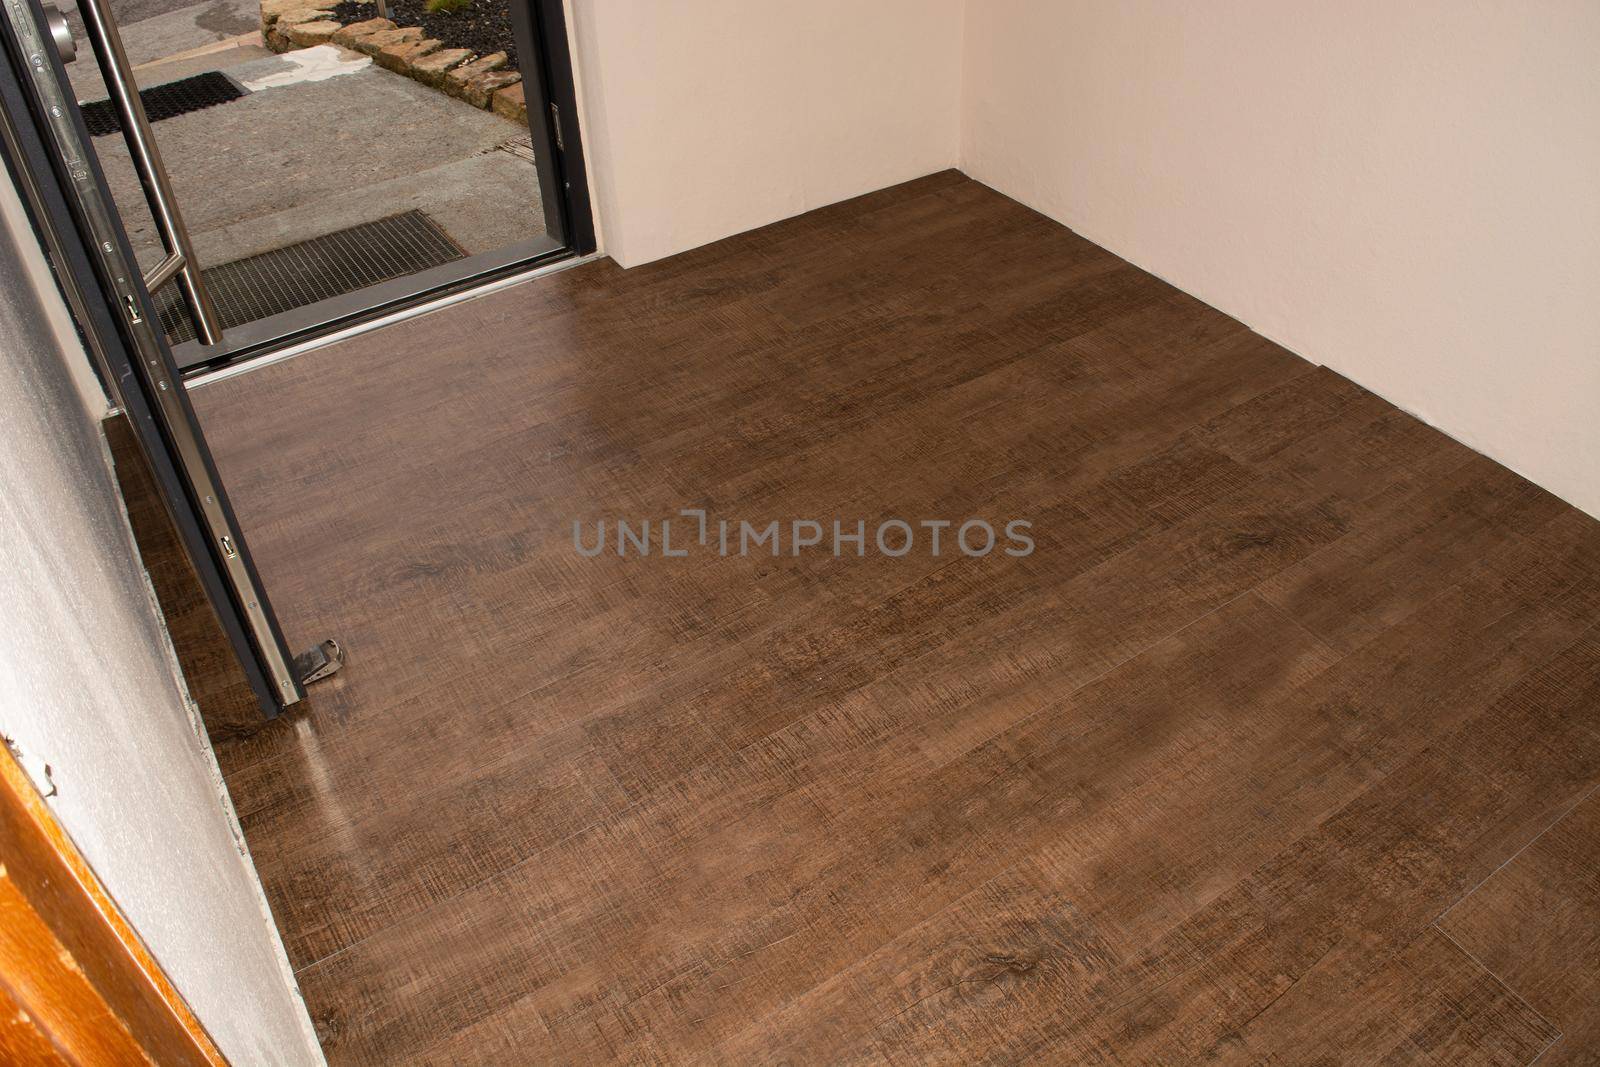 Threaded panel of a laminate floor    by JFsPic